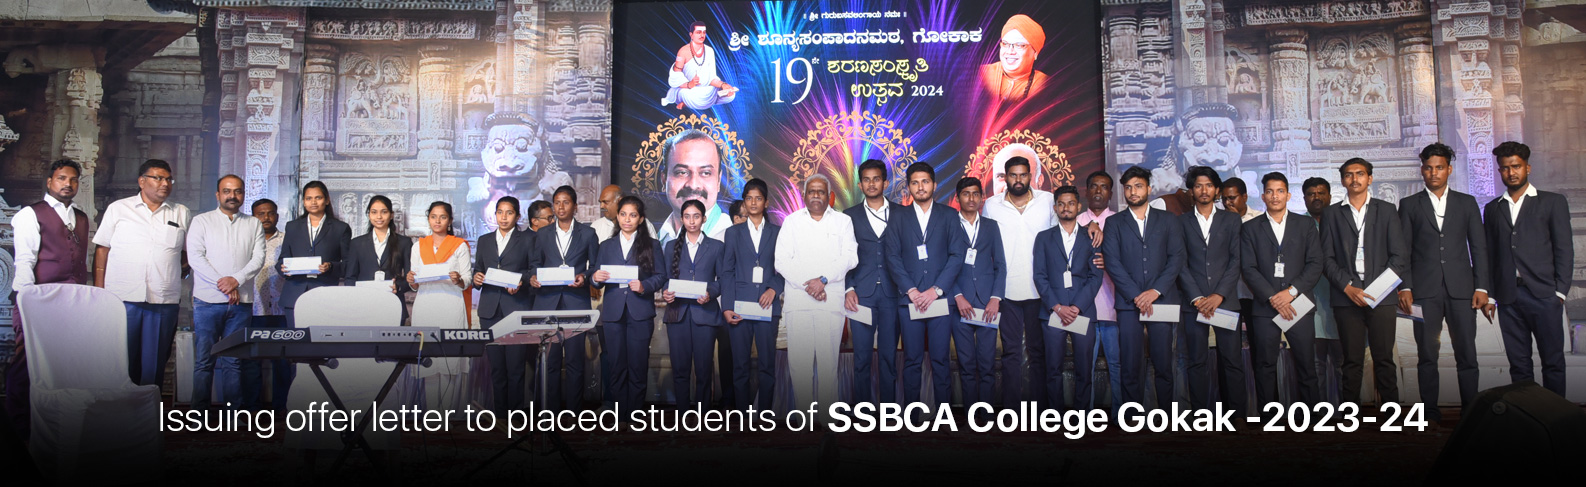 Issuing offer letter to placed student of SSBCA College Gokak